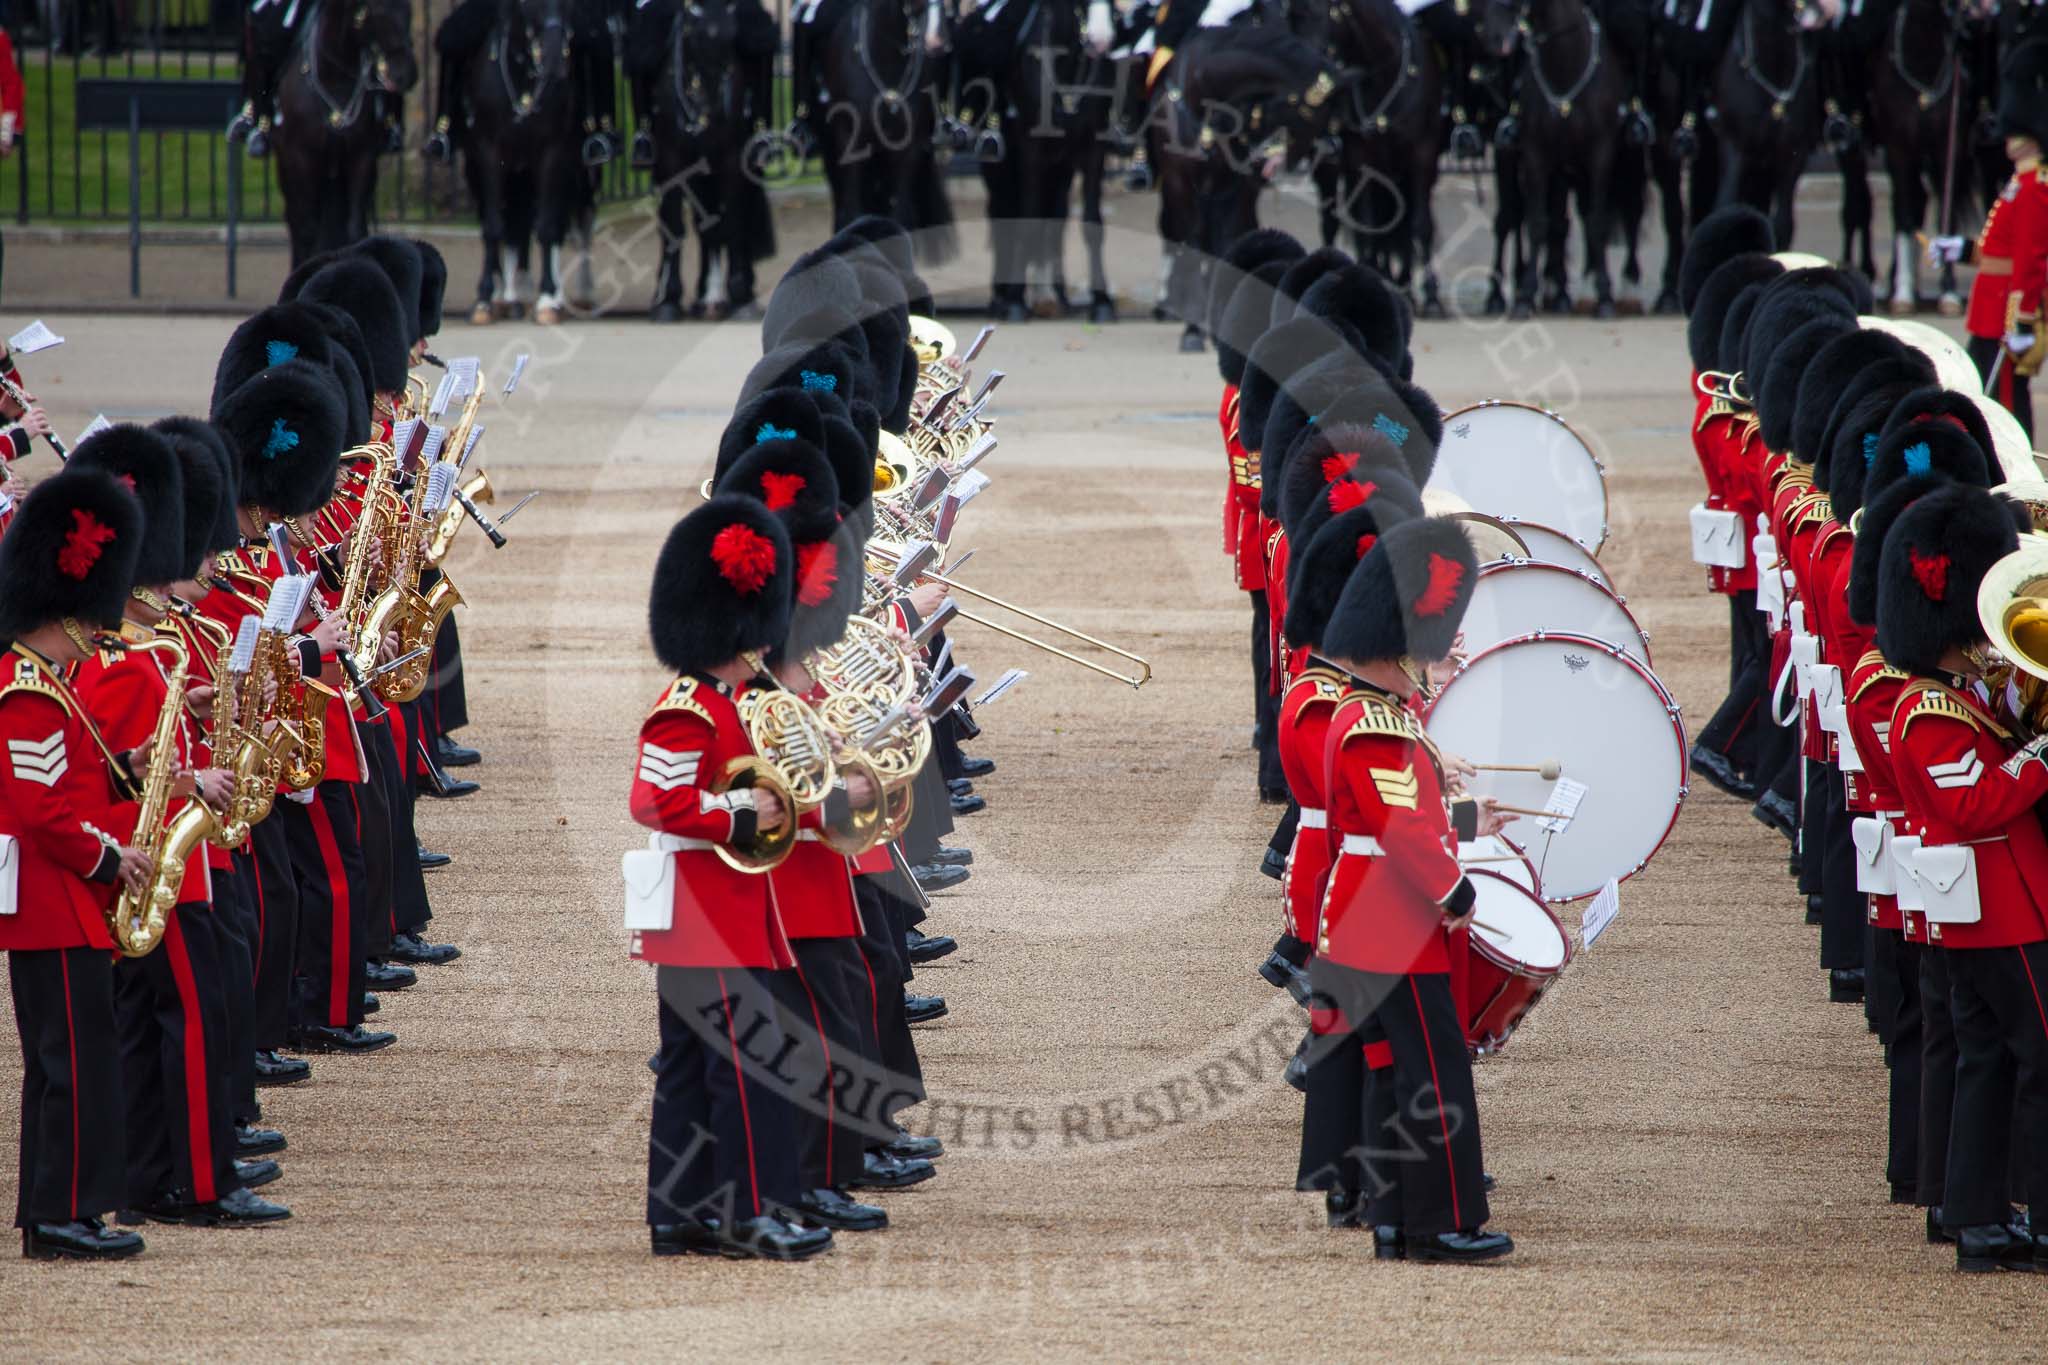 Trooping the Colour 2012: The Massed bands during the March Past..
Horse Guards Parade, Westminster,
London SW1,

United Kingdom,
on 16 June 2012 at 11:32, image #382